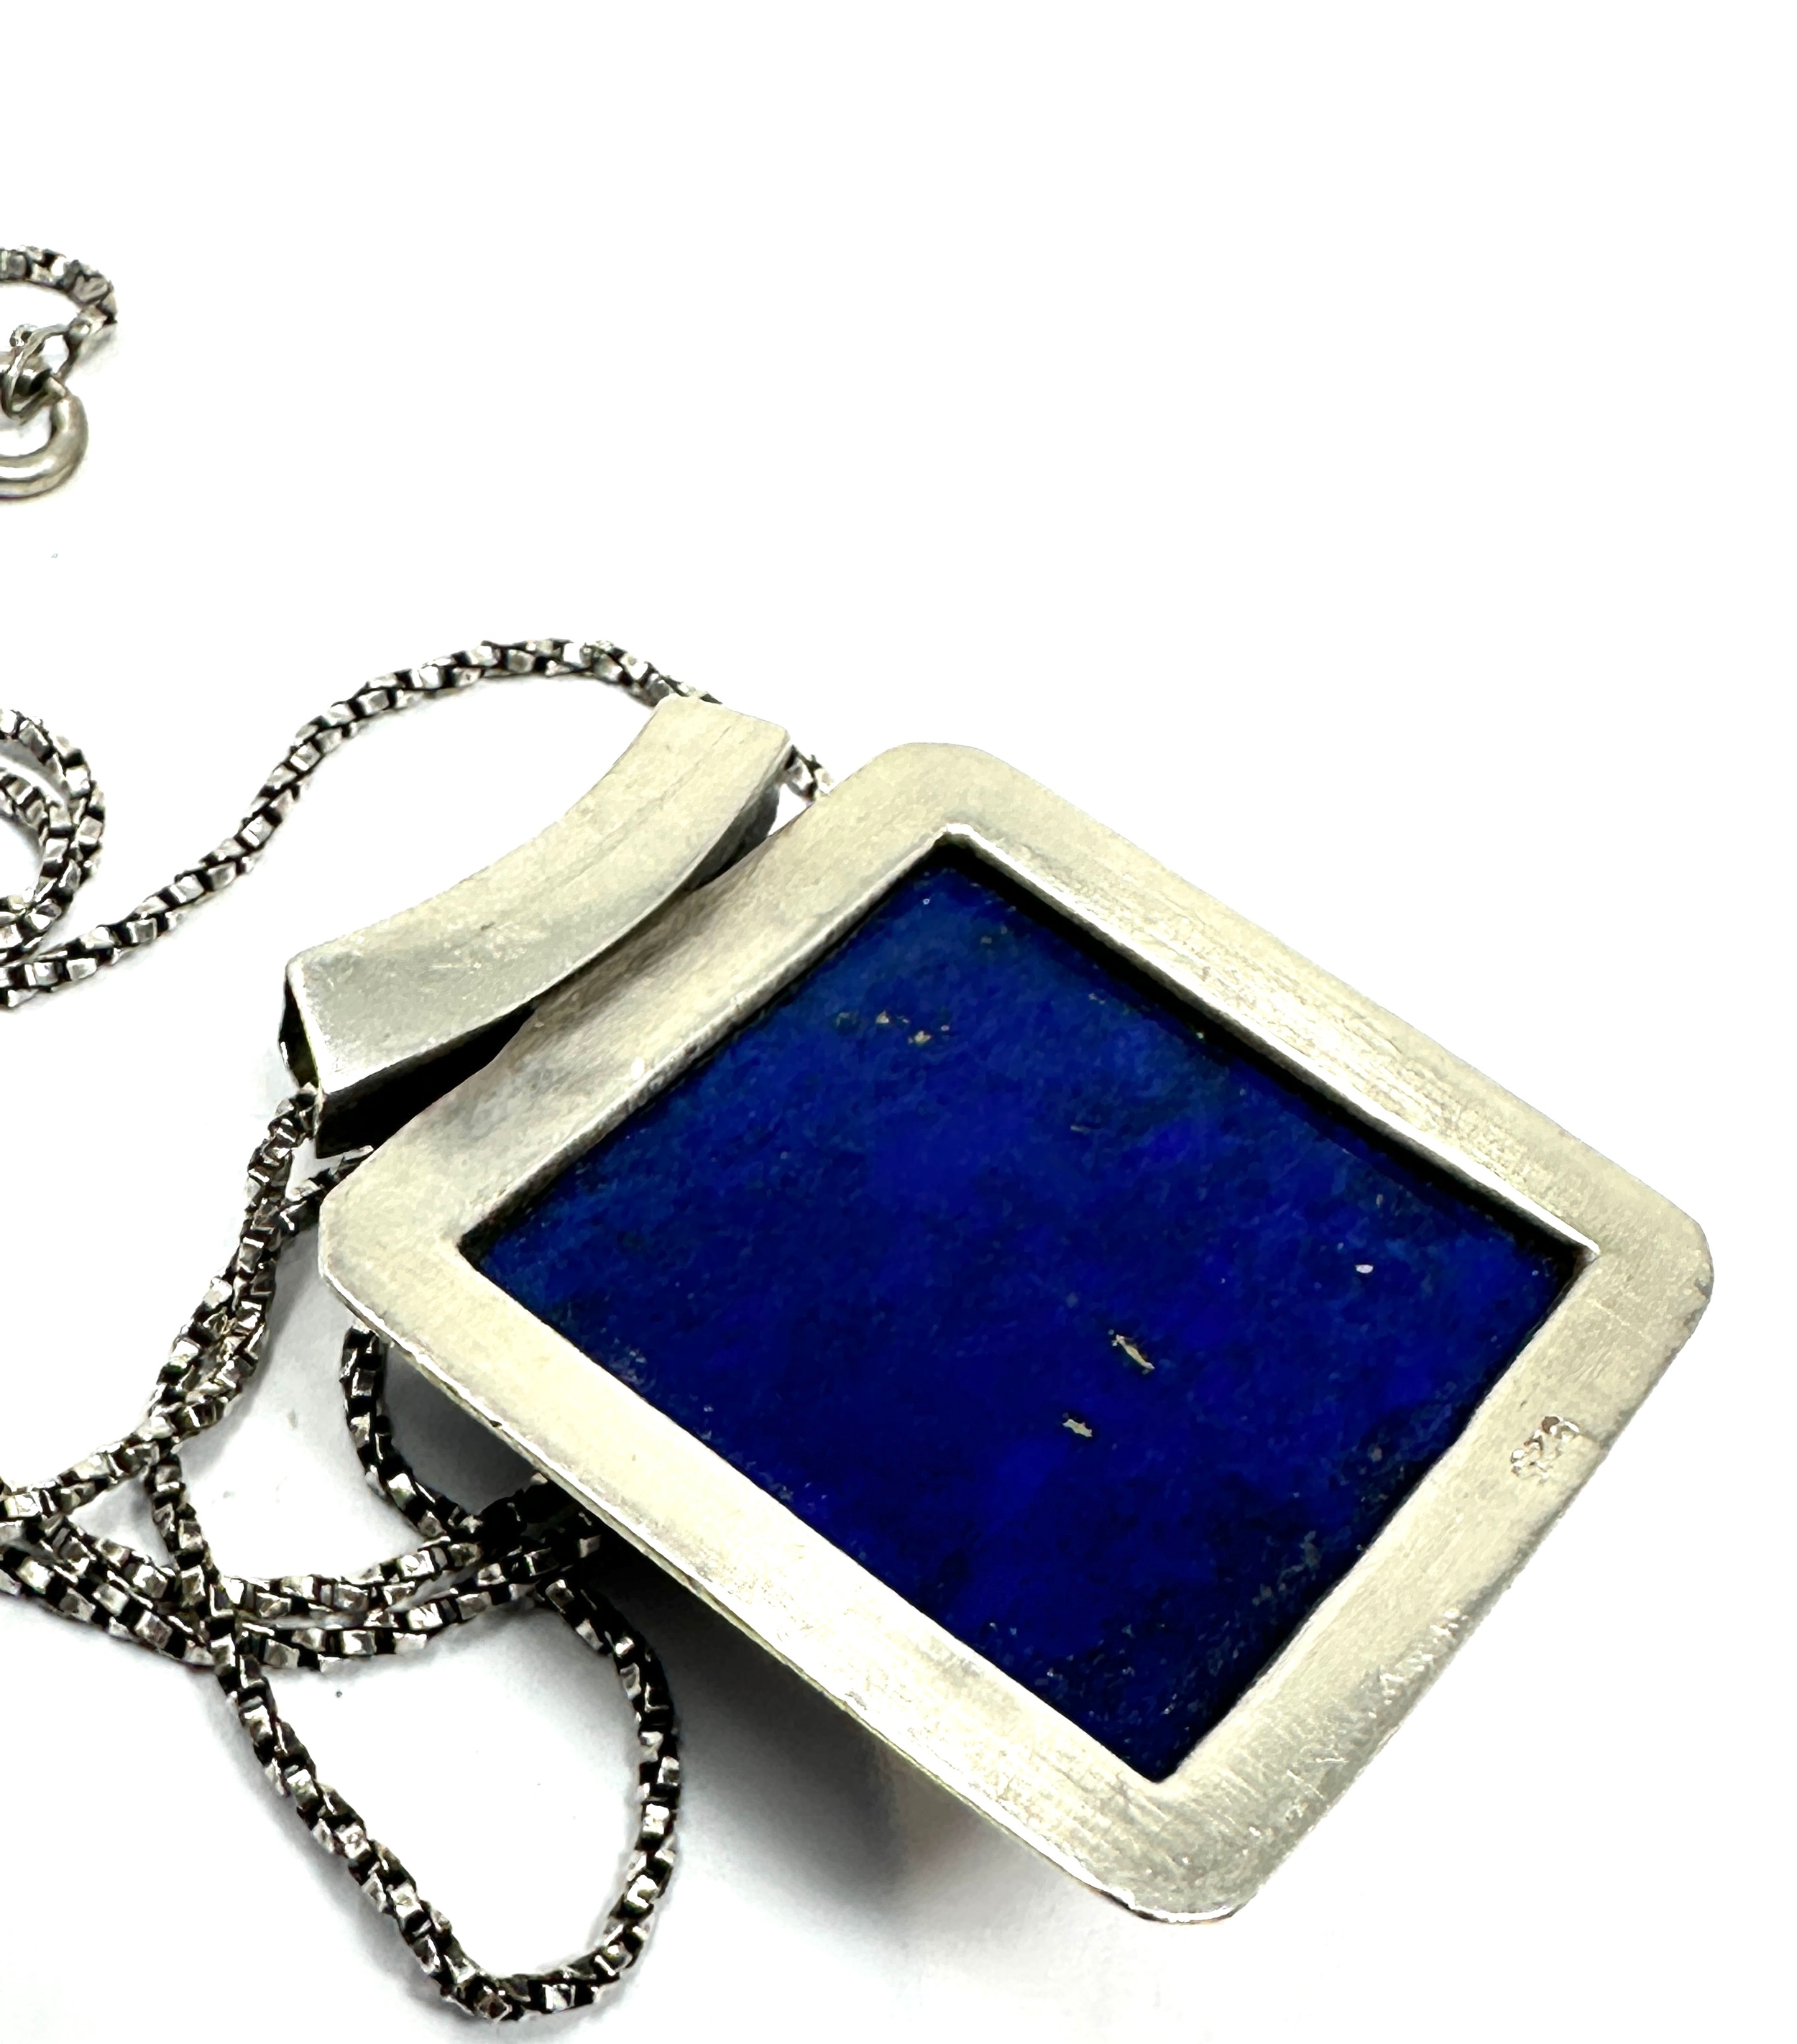 Vintage silver lapis set with moonstone pendant necklace the pendant measures approx 4cm drop by 3. - Image 4 of 4